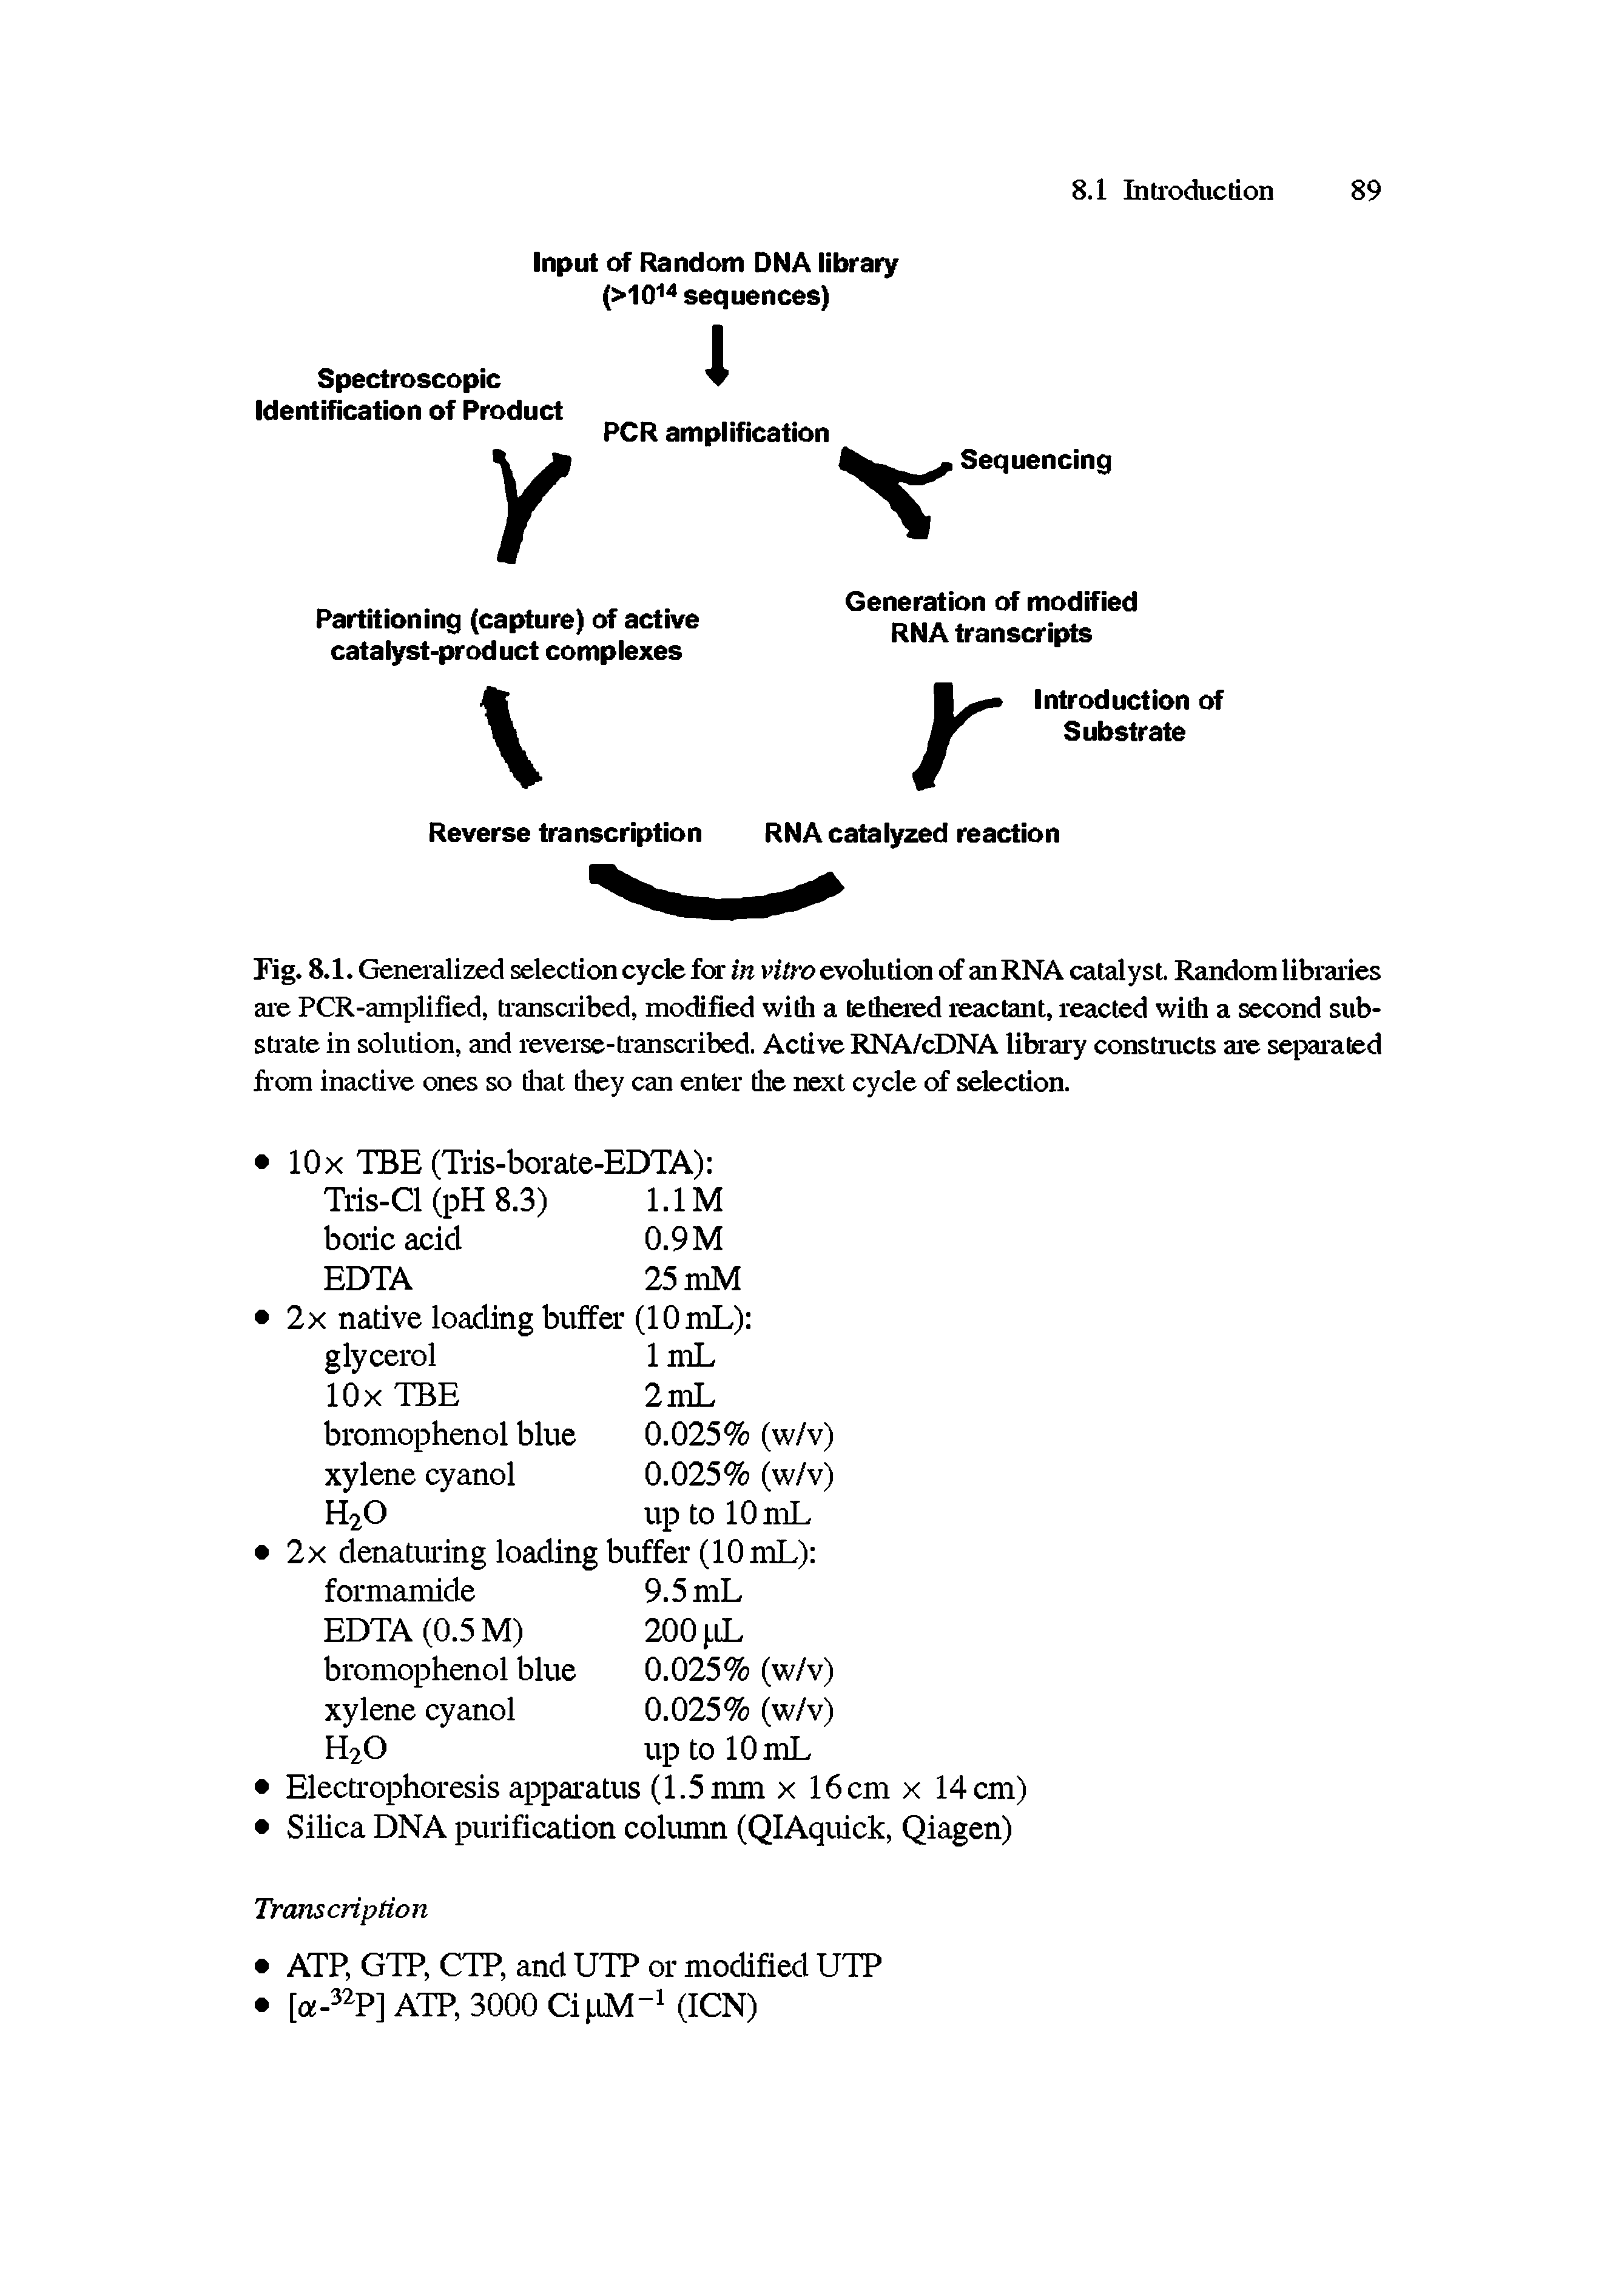 Fig. 8.1. Generalized selection cycle for in vitro evolution of an RNA catalyst. Random libraries are PCR-amplified, transcribed, modified with a tethered reactant, reacted with a second substrate in solution, and reverse-transcribed. Active RNA/cDNA library constructs are separated from inactive ones so that they can enter the next cycle of selection.